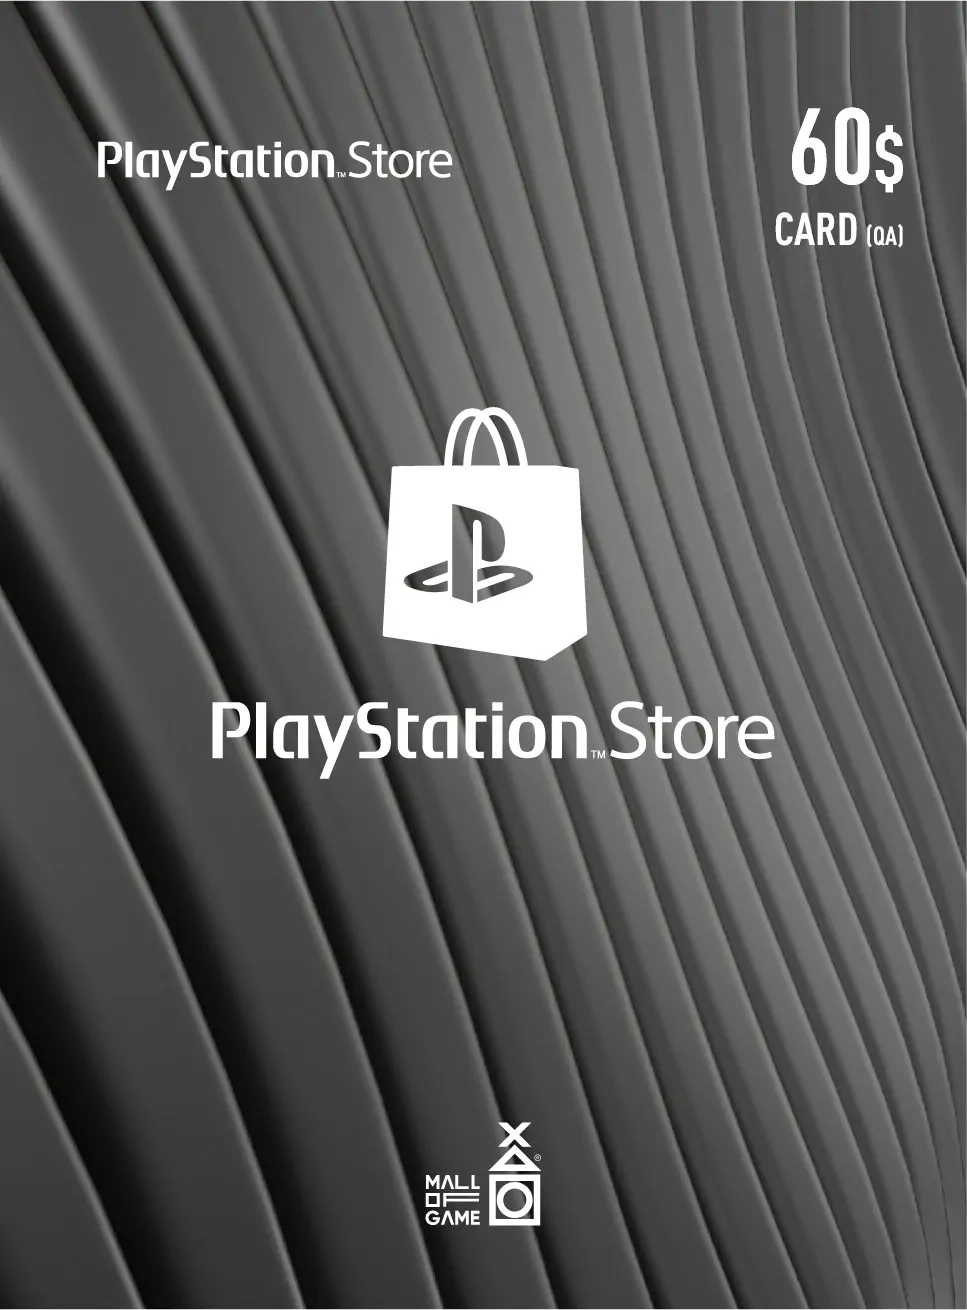 PlayStation™Store USD60 Gift Cards (QA)